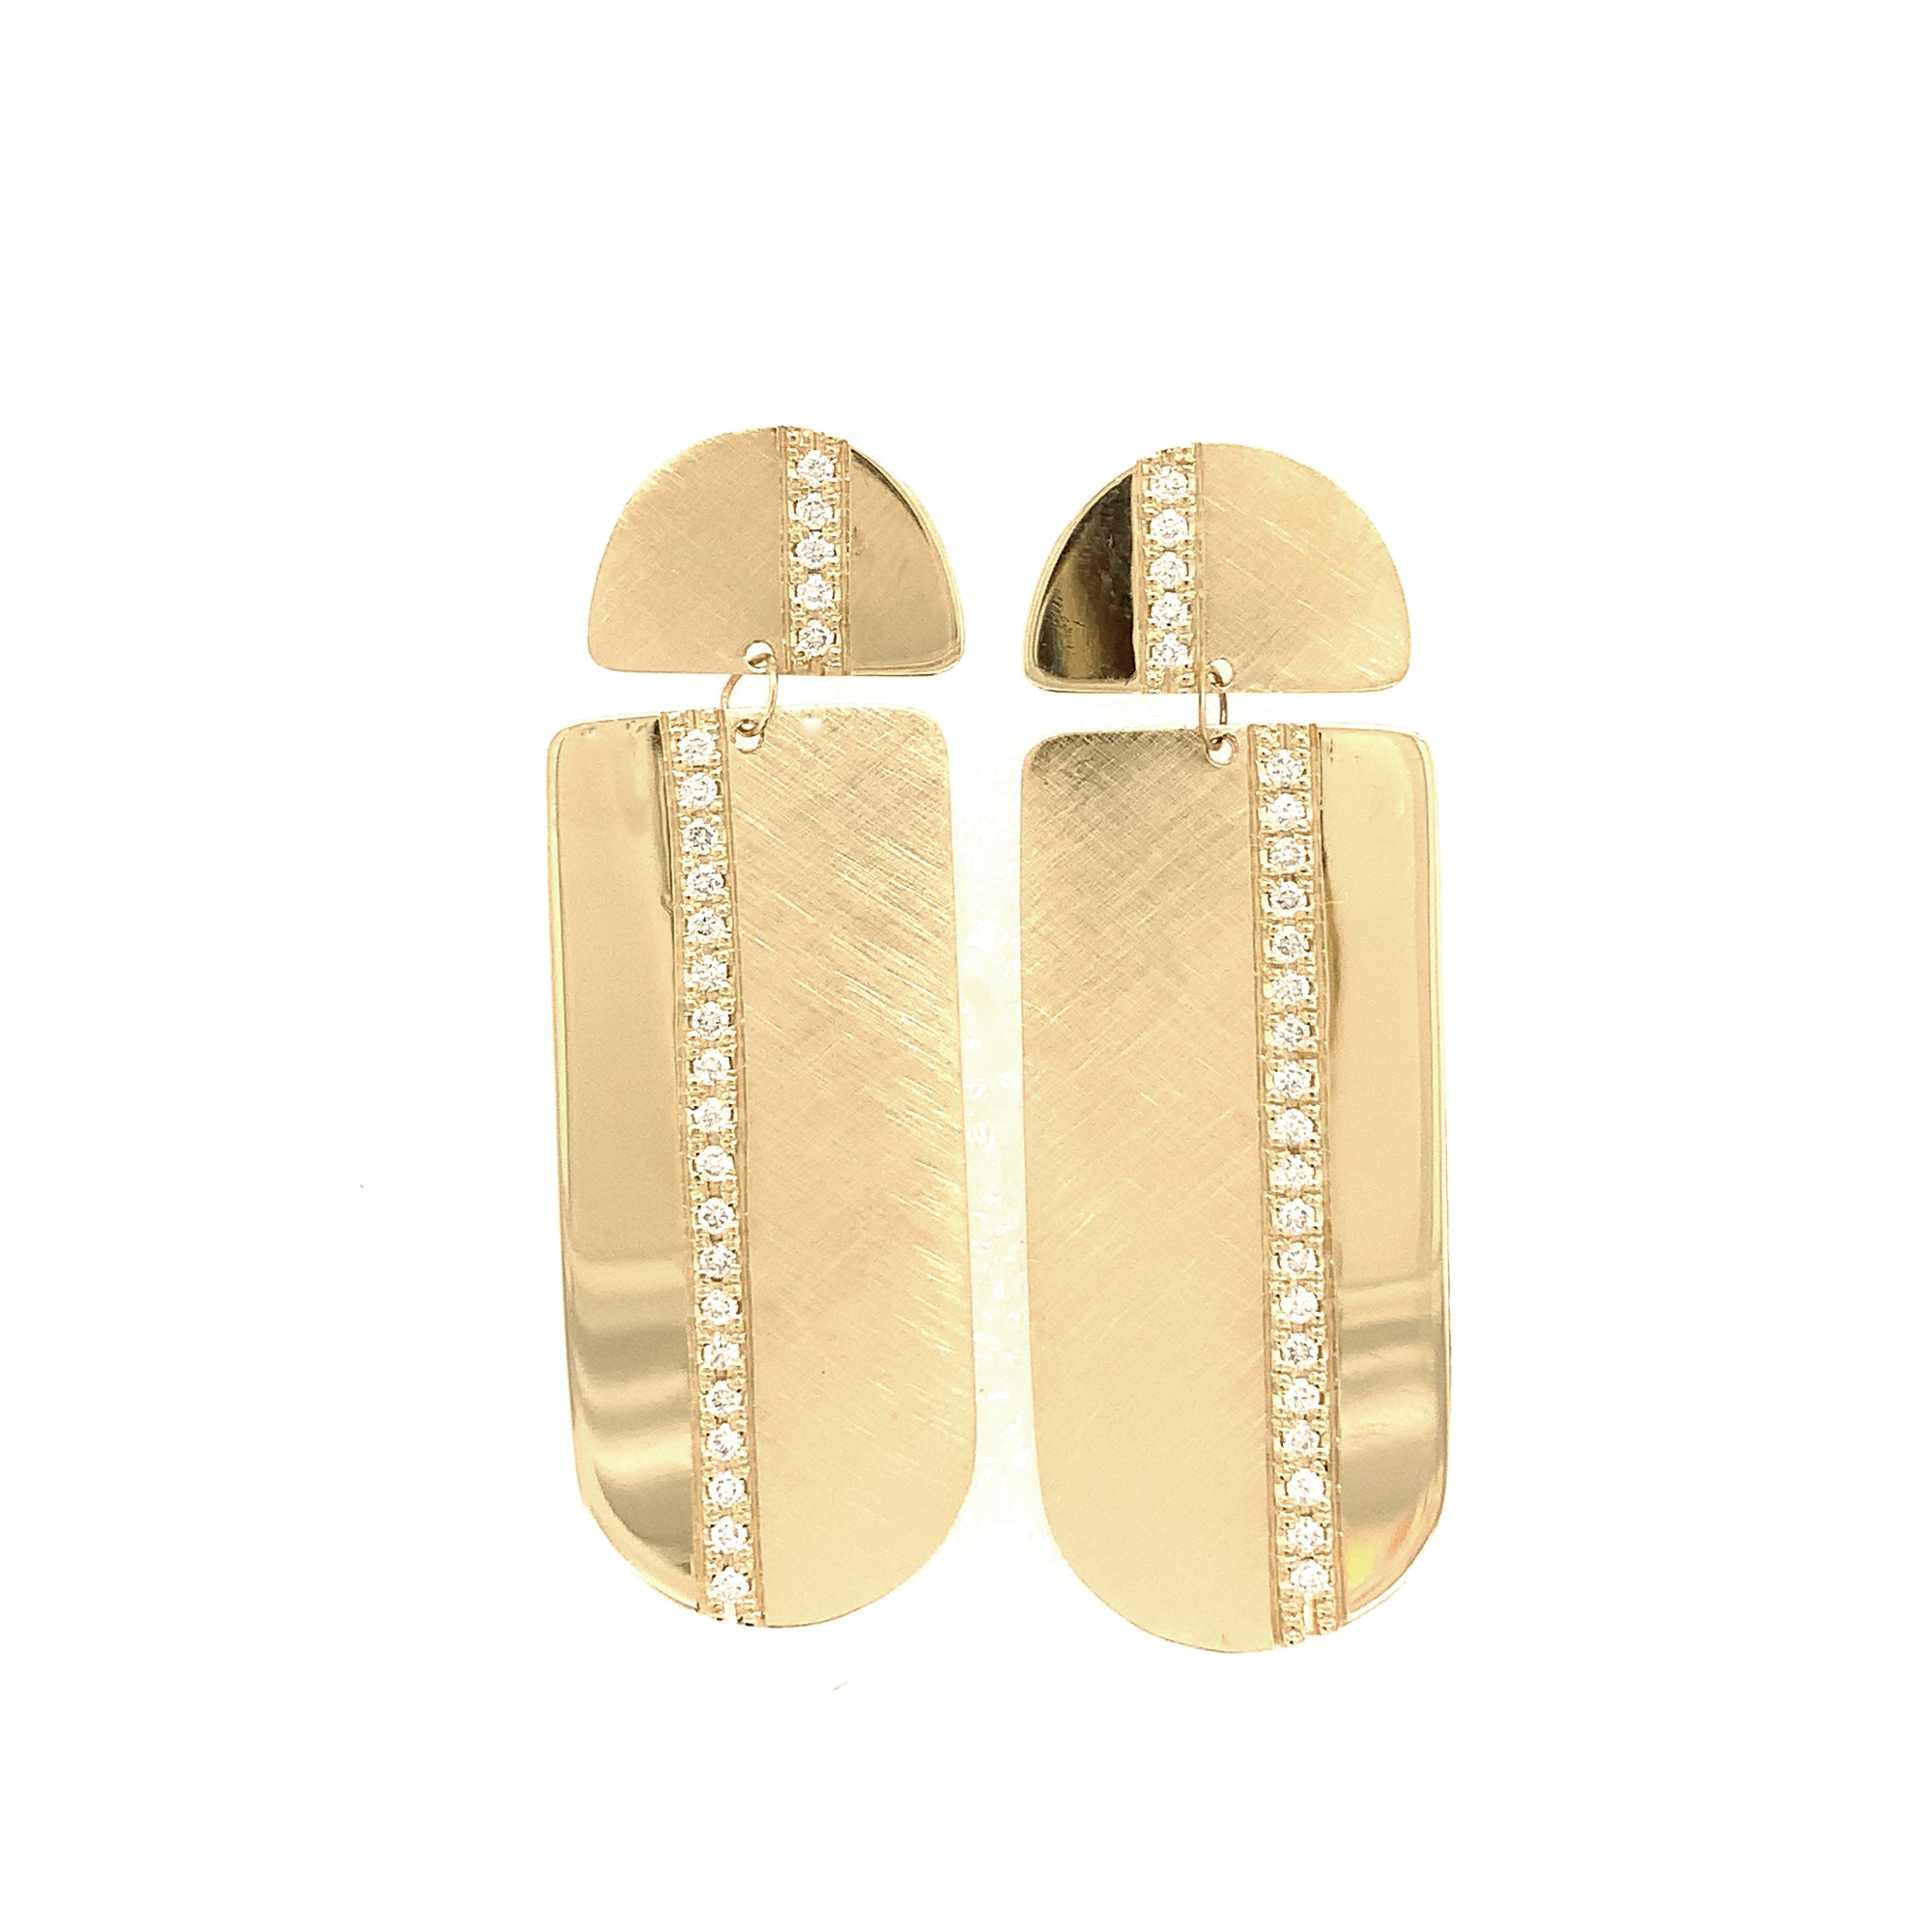 14k yellow gold large vertical bar earrings with complimenting shiny and satin finish and single row of white diamond accent